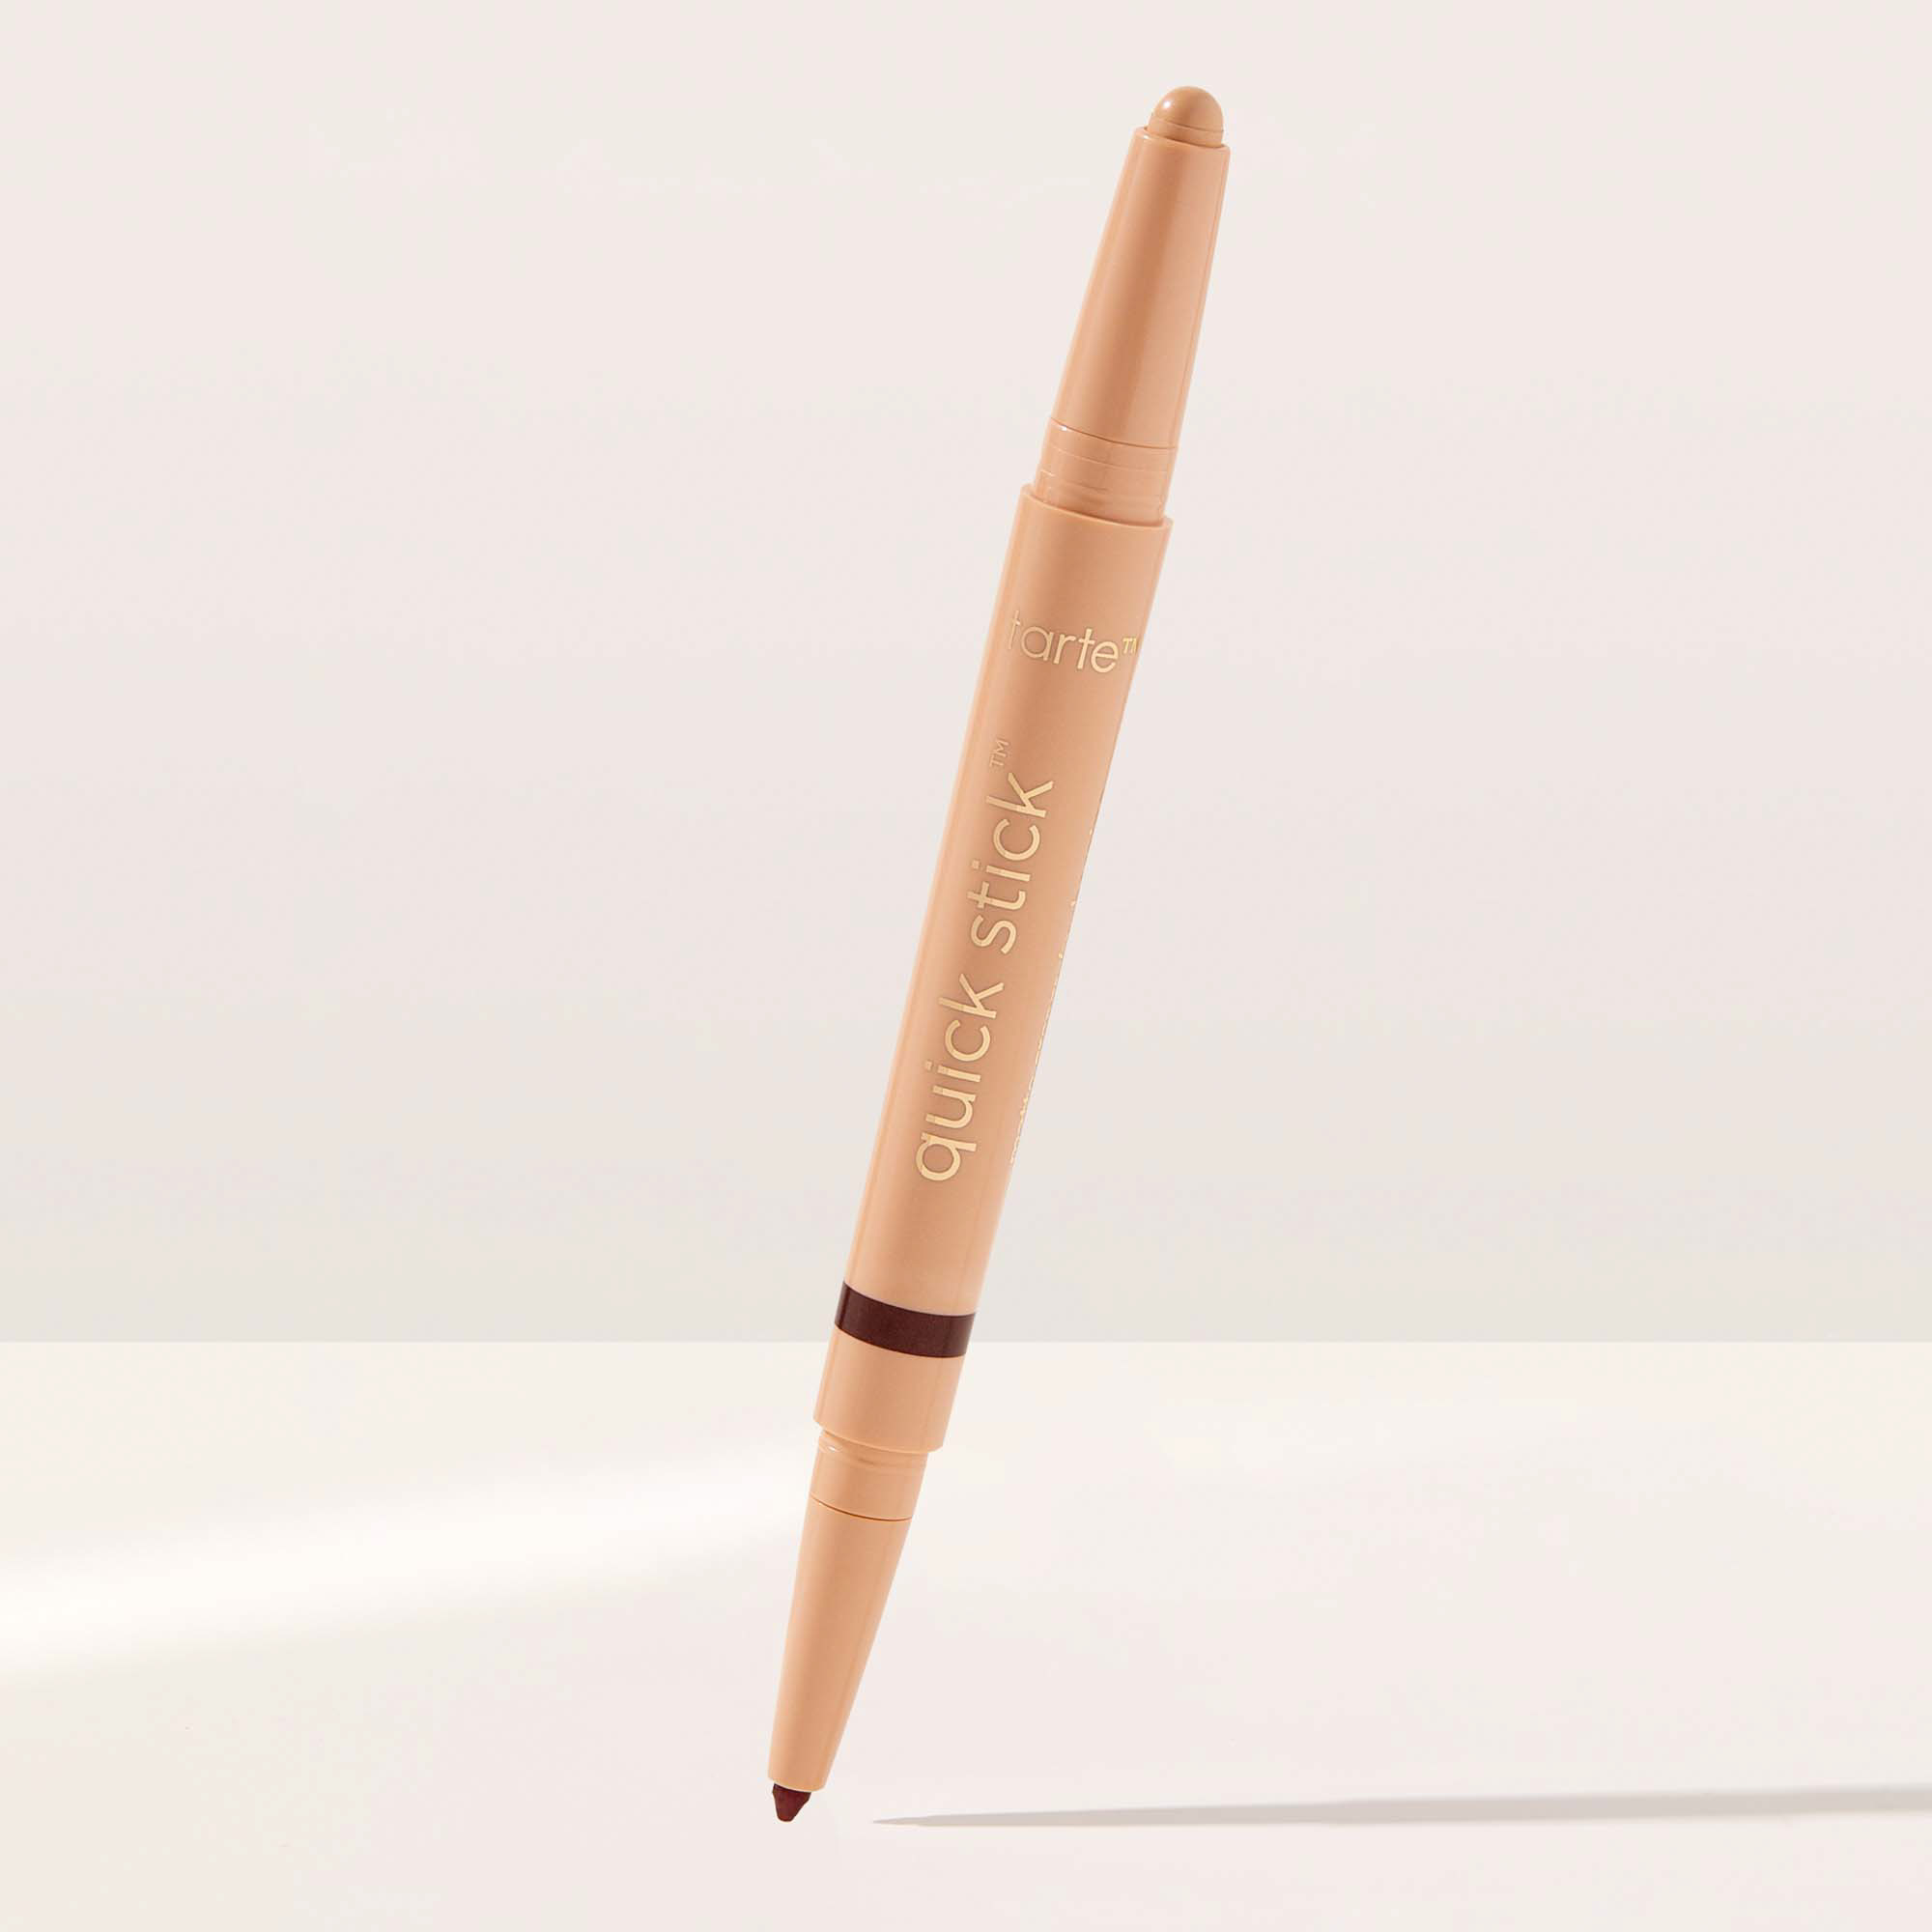 Tarte Cosmetics Quick Stickâ?¢ Waterproof Shadow & Liner In White